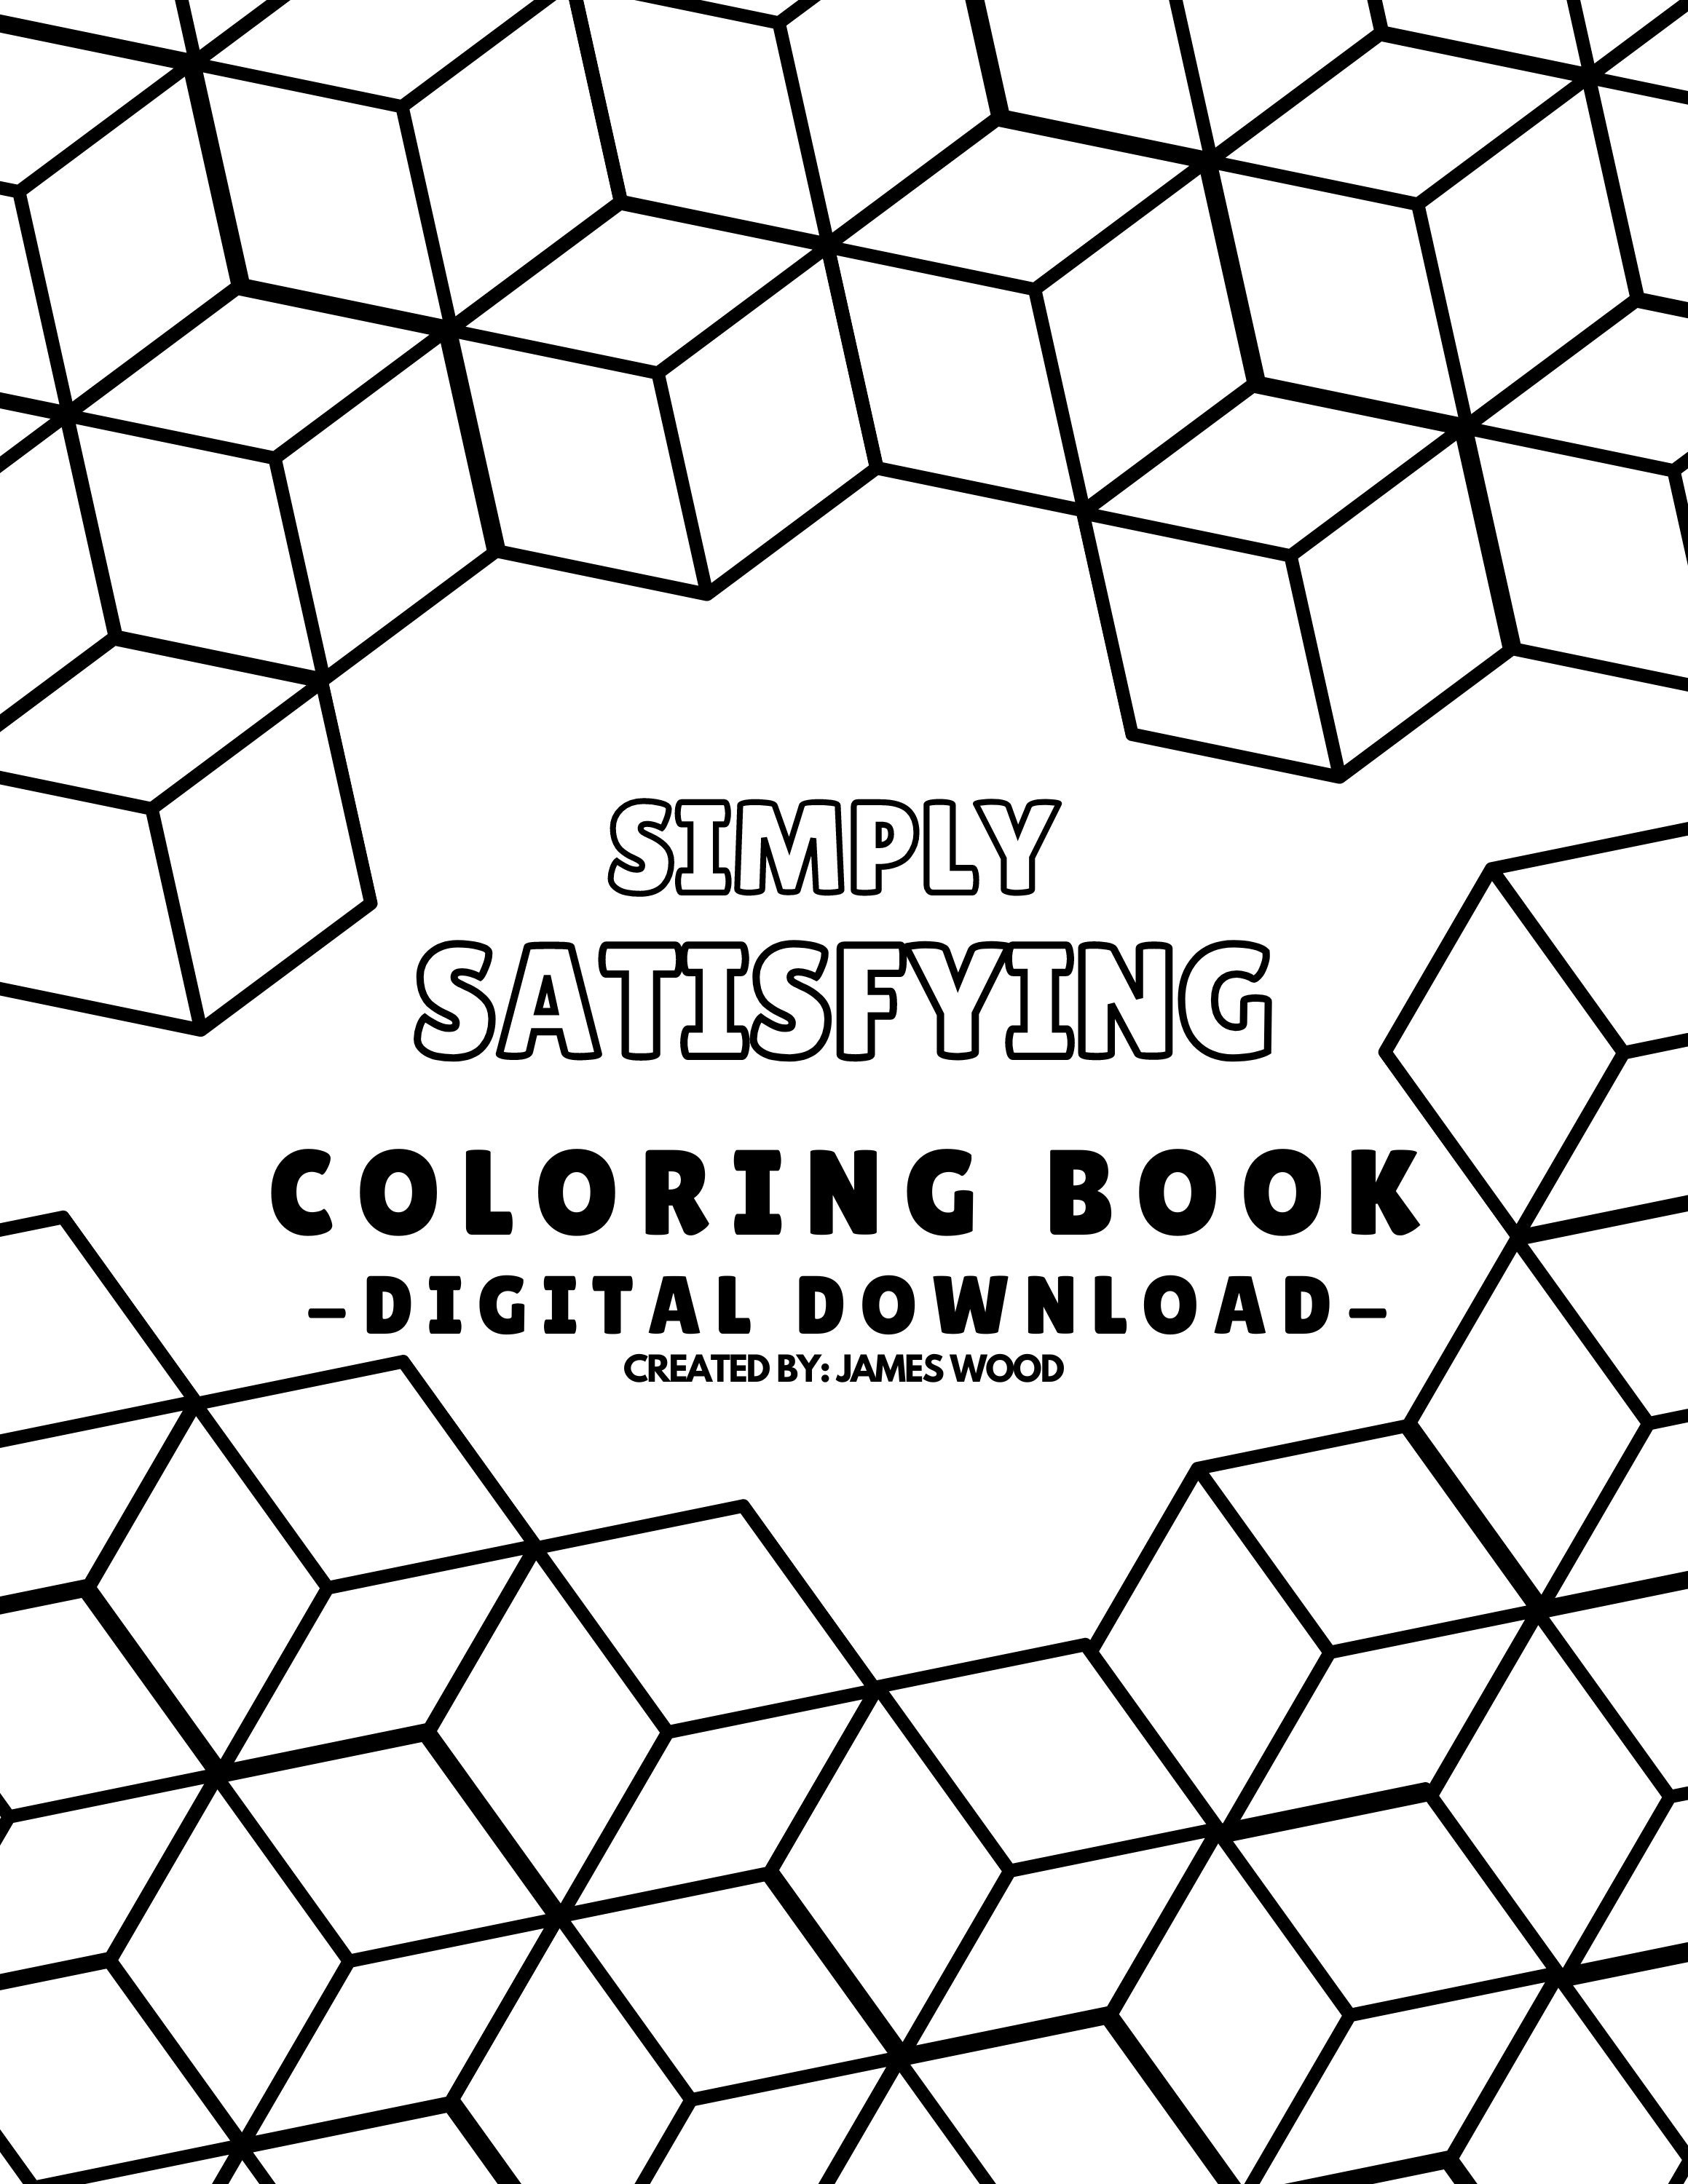 Simply Satisfying Coloring Book 